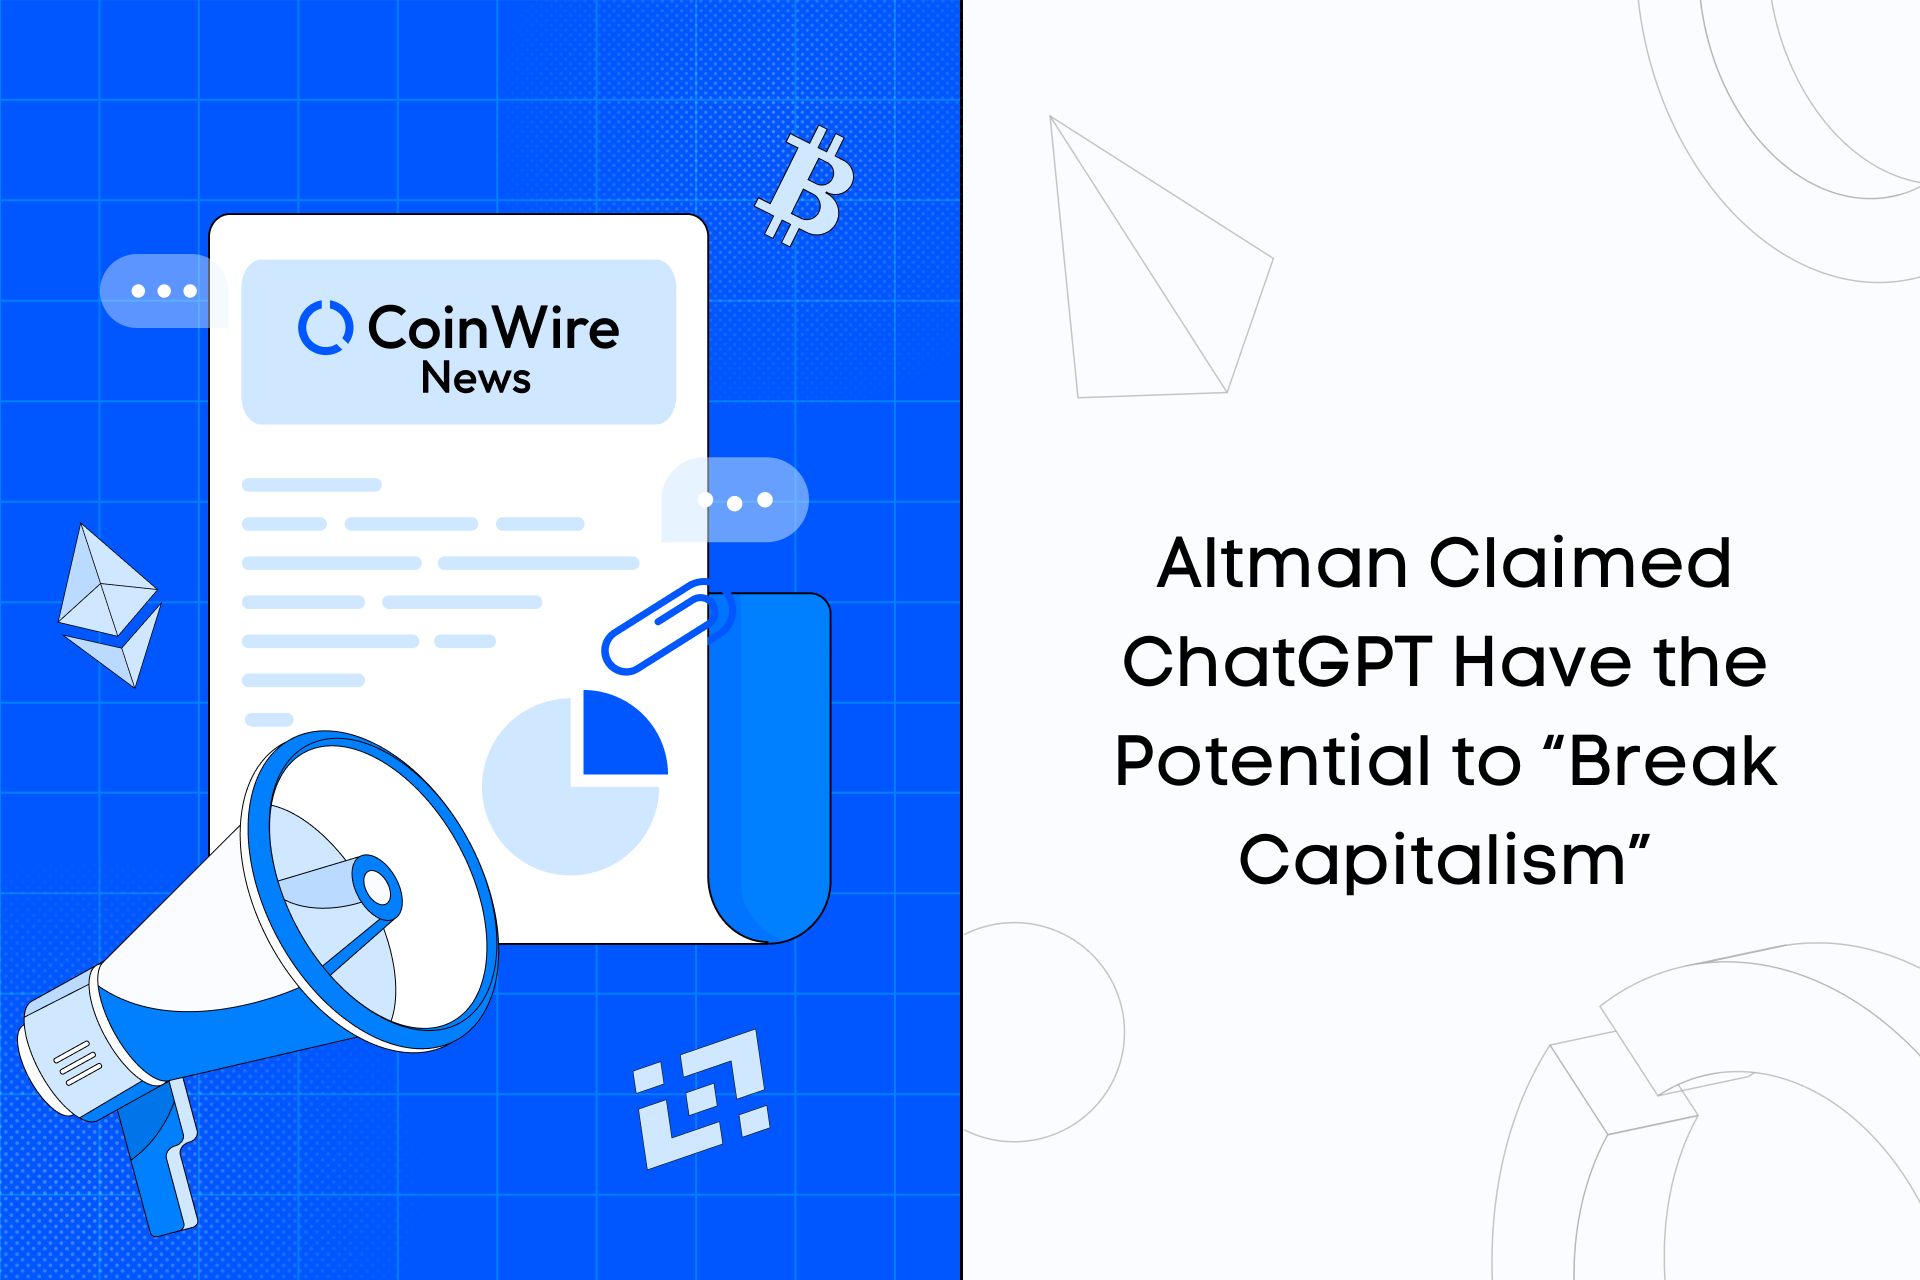 Altman Claimed Chatgpt Have The Potential To “Break Capitalism”